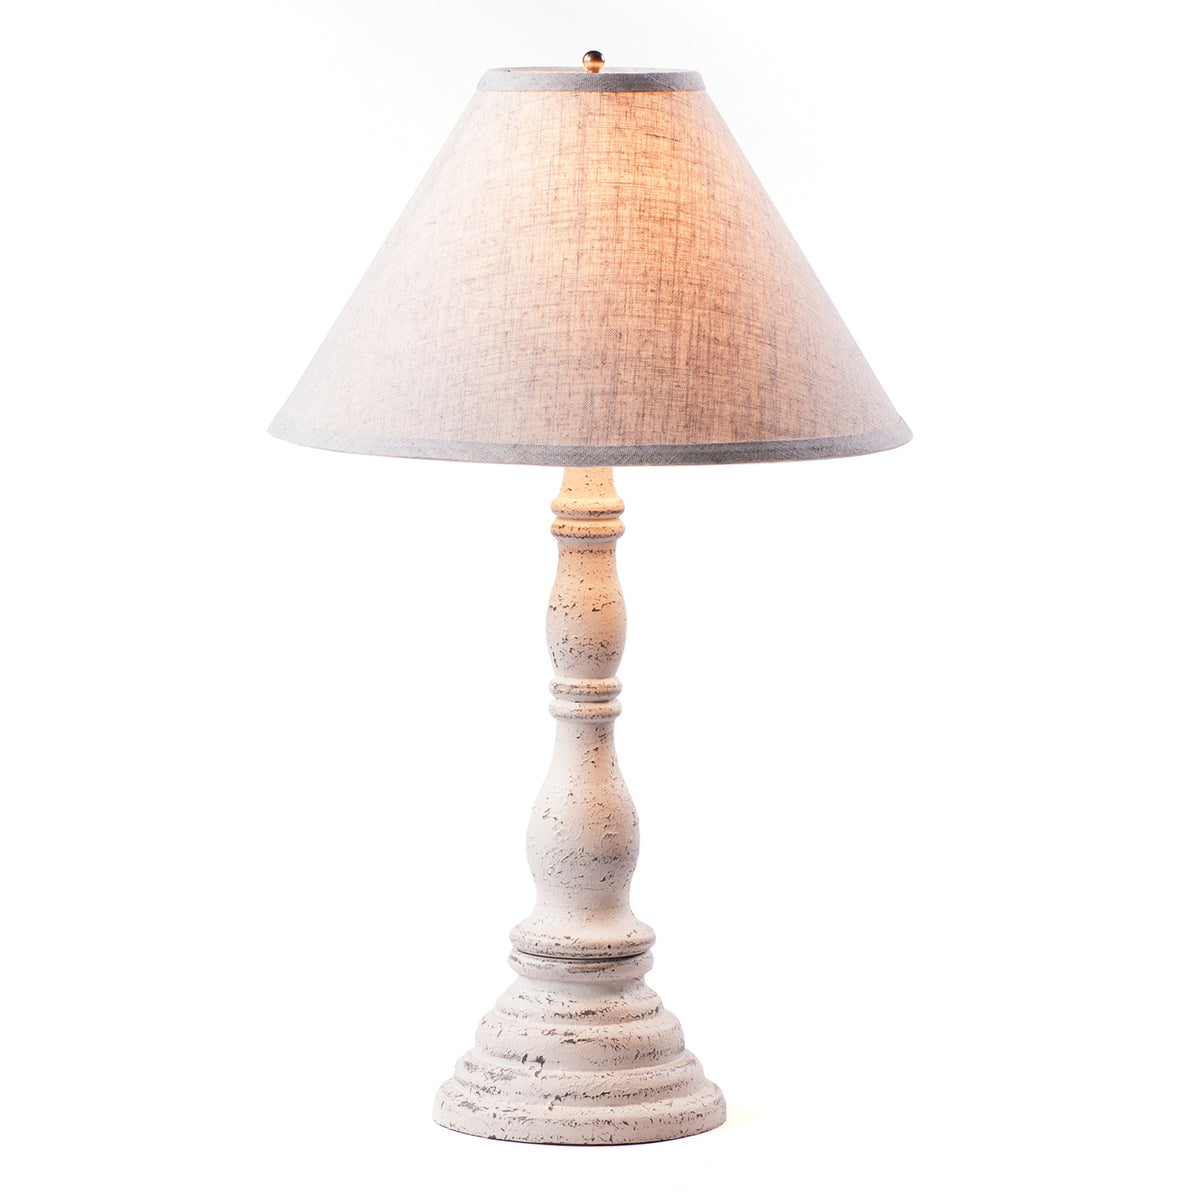 Davenport Lamp in Americana White with Linen Ivory Shade